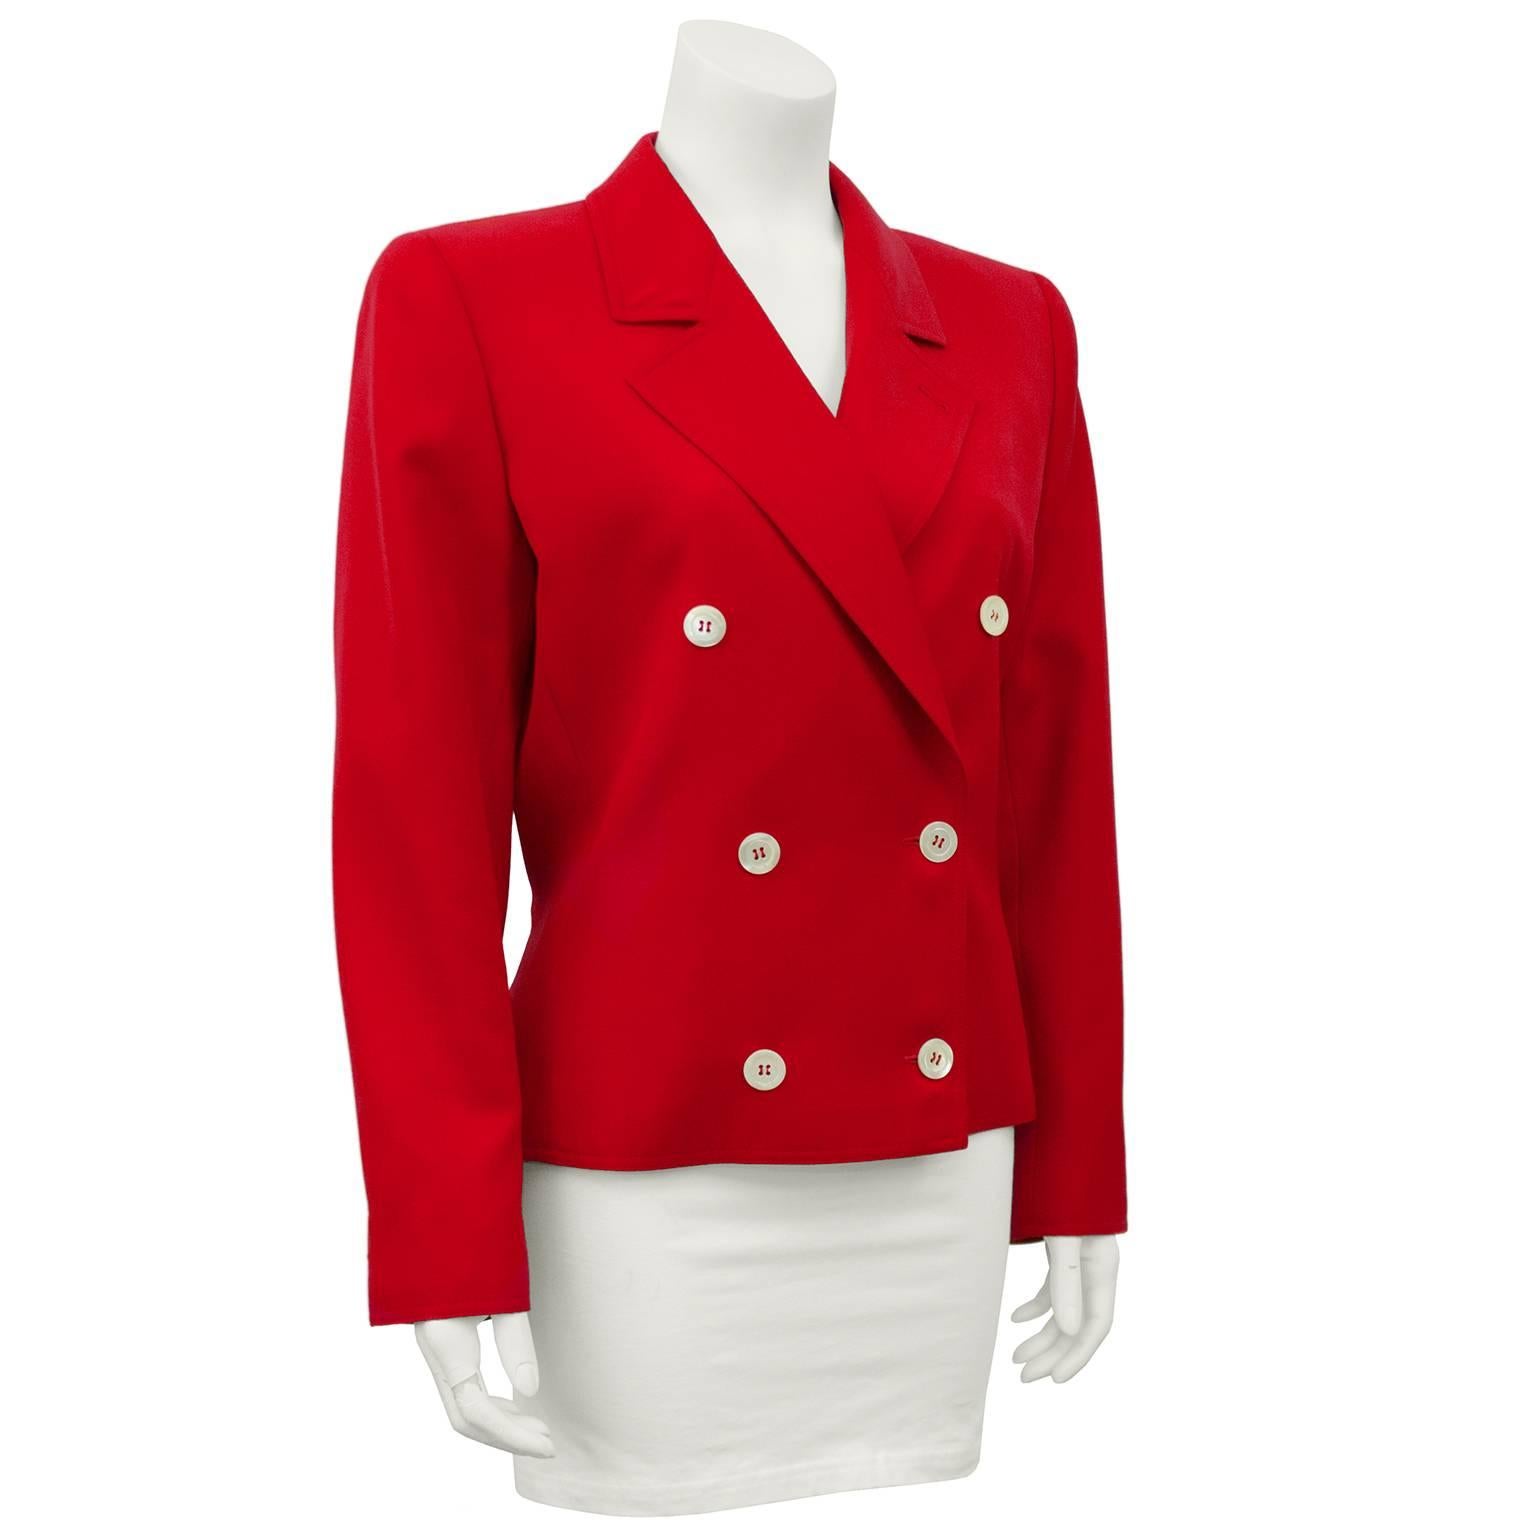 Chic double breasted light weight wool red jacket from the Miss V line by Valentino from the 1980s. The bright red fabric is accented with crisp white buttons down the front and a notched lapel. Seams down the front give this jacket a great shape